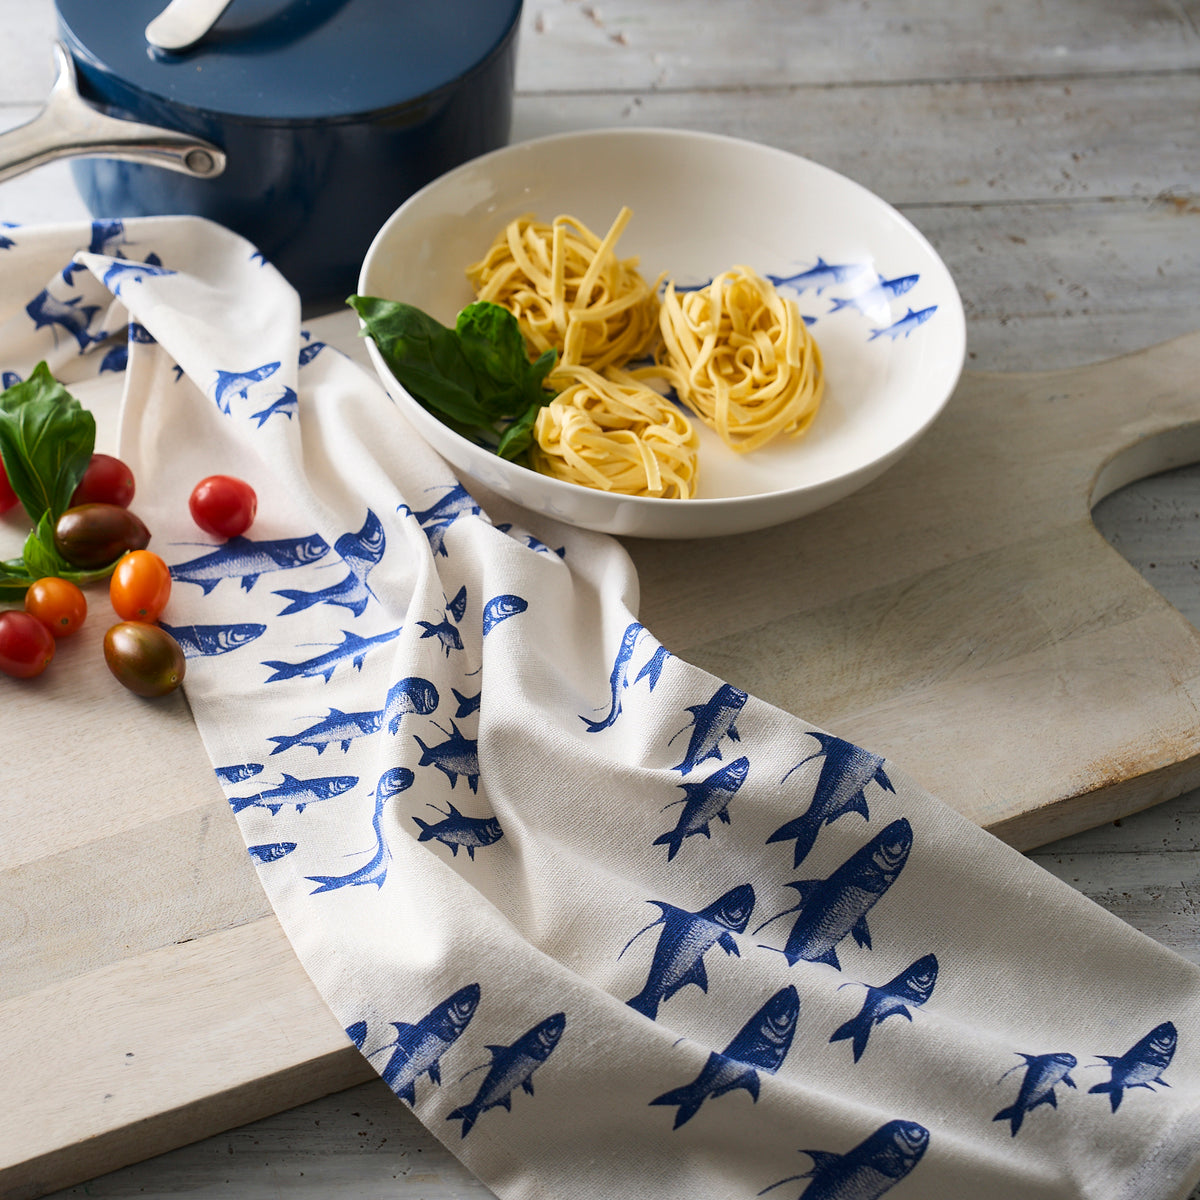 A blue pot and a white plate containing uncooked pasta and basil rest on a wooden surface, accompanied by cherry tomatoes, basil, and a charming school of fish-patterned cloth. This elegant setup features our School Fish Entrée Bowl from Caskata Artisanal Home, perfect for your culinary creations.